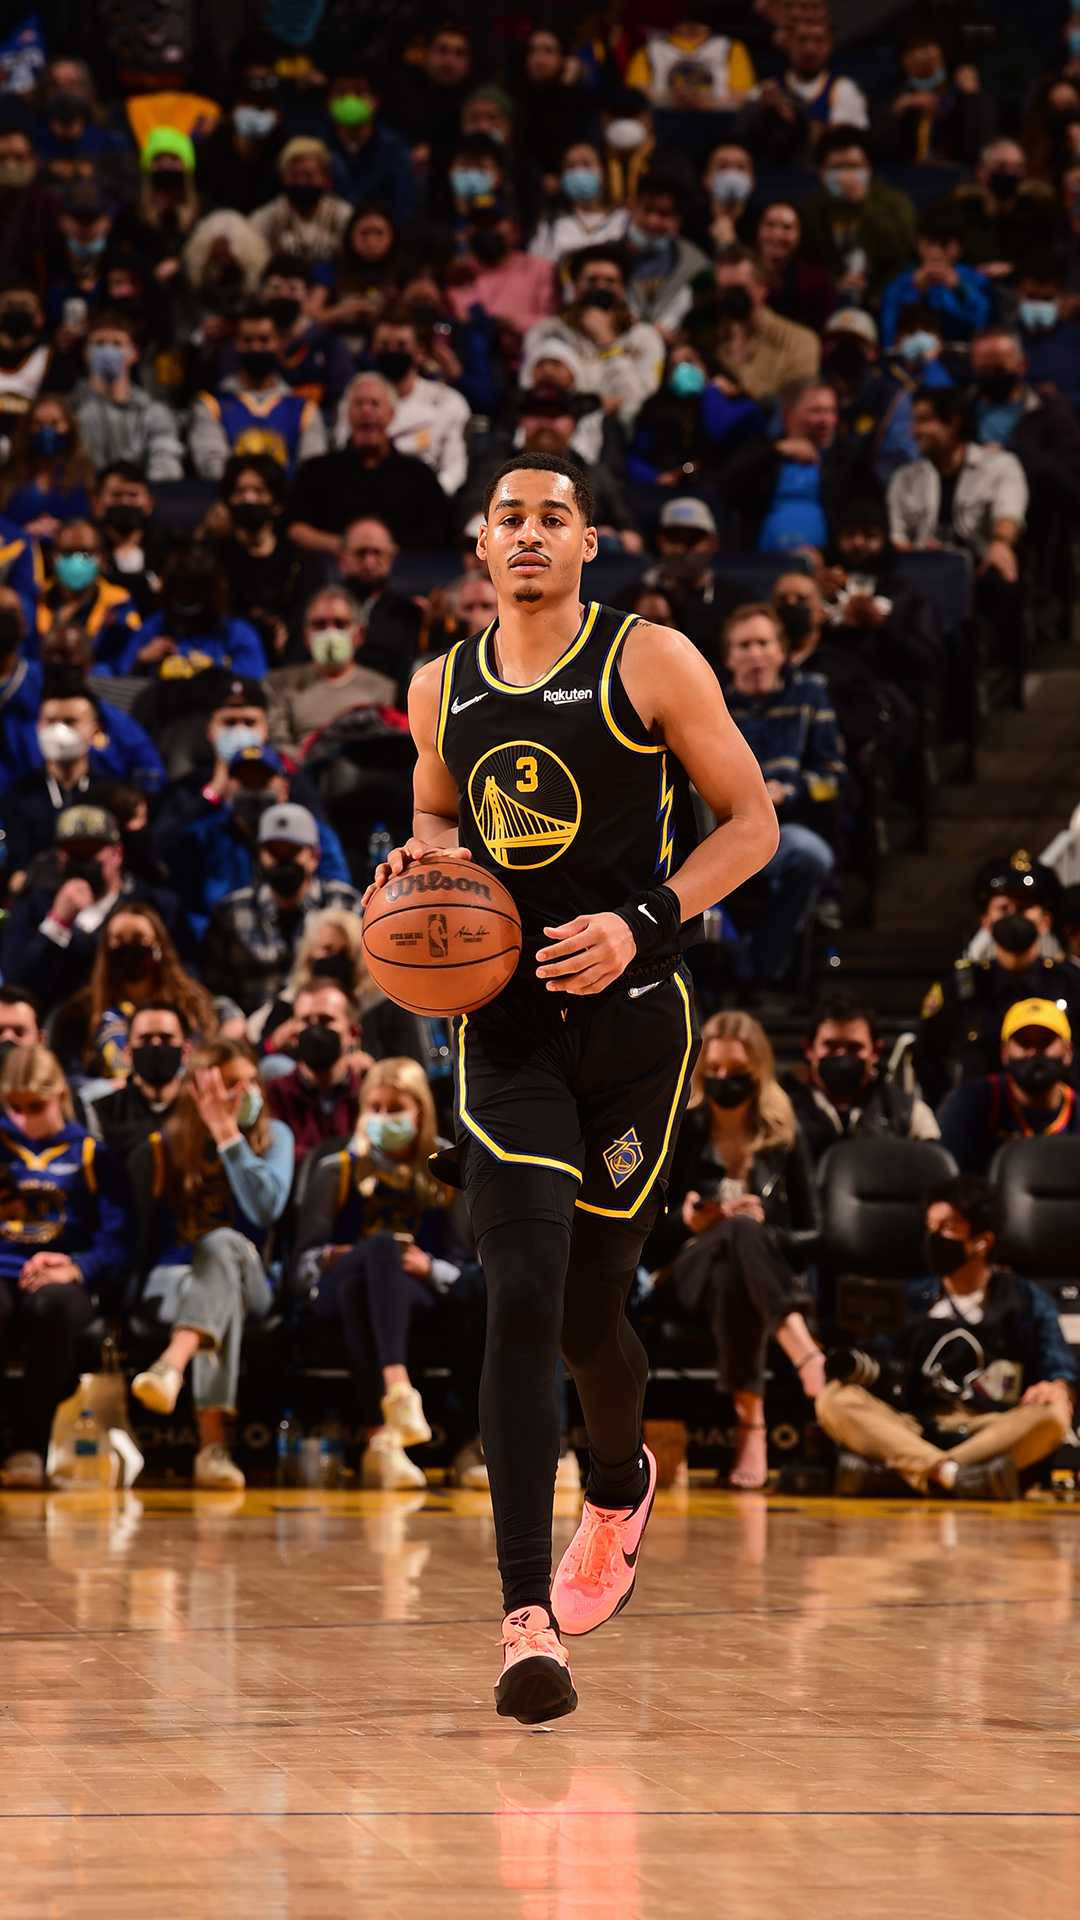 Dynamic Shot Of Nba Star, Jordan Poole In Action Background